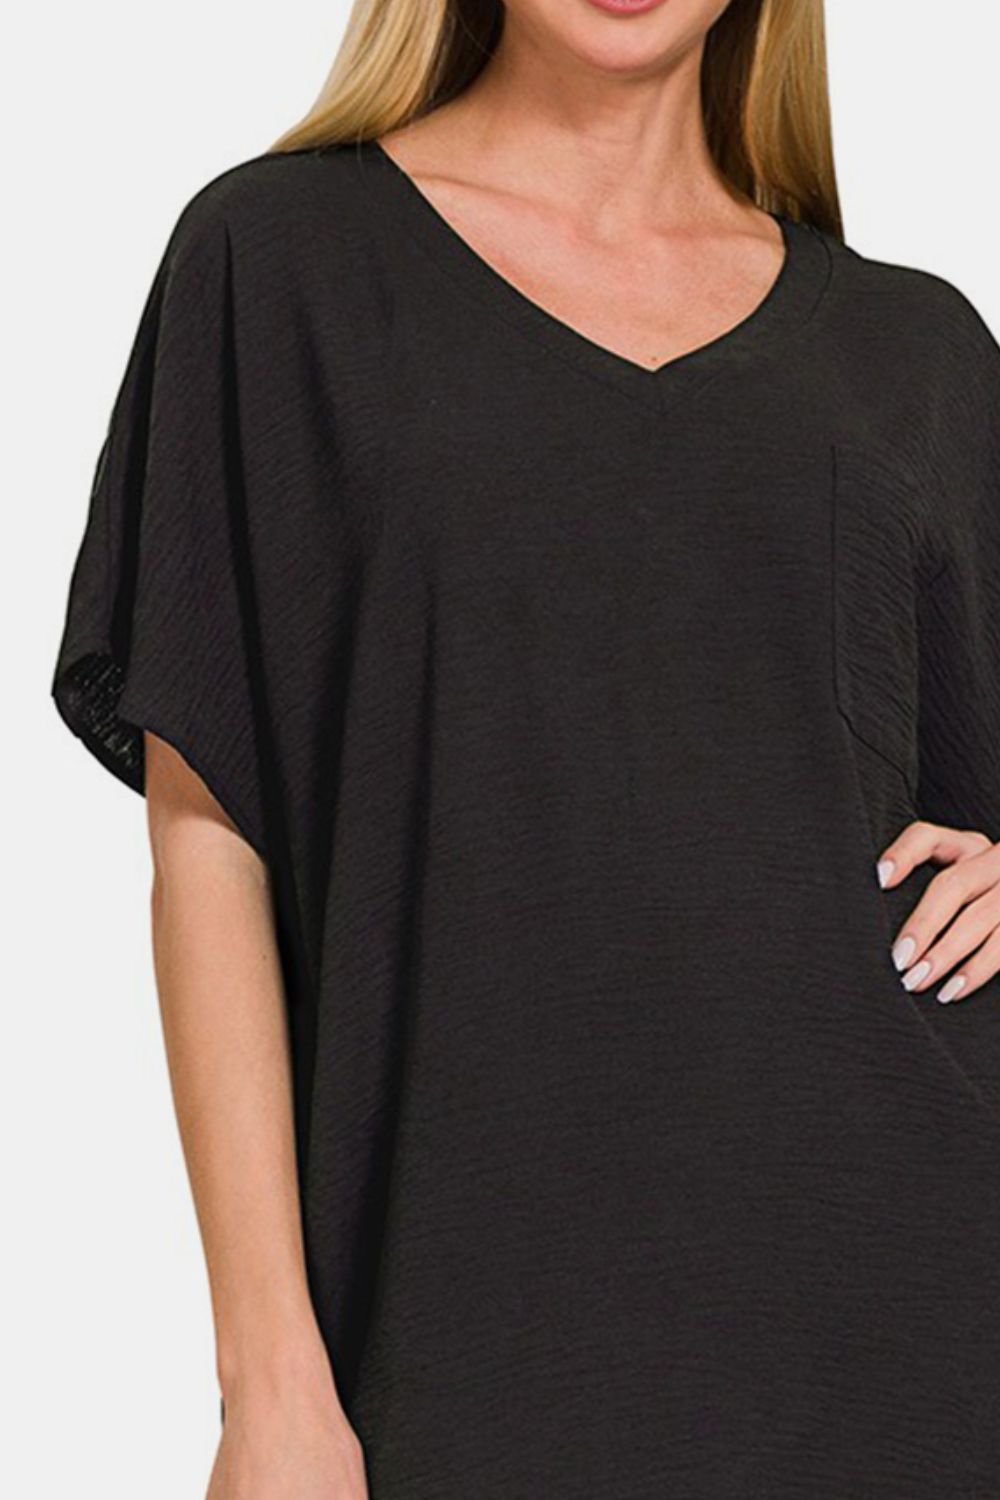 Woven Airflow V-Neck T-Shirt Dress With Pockets